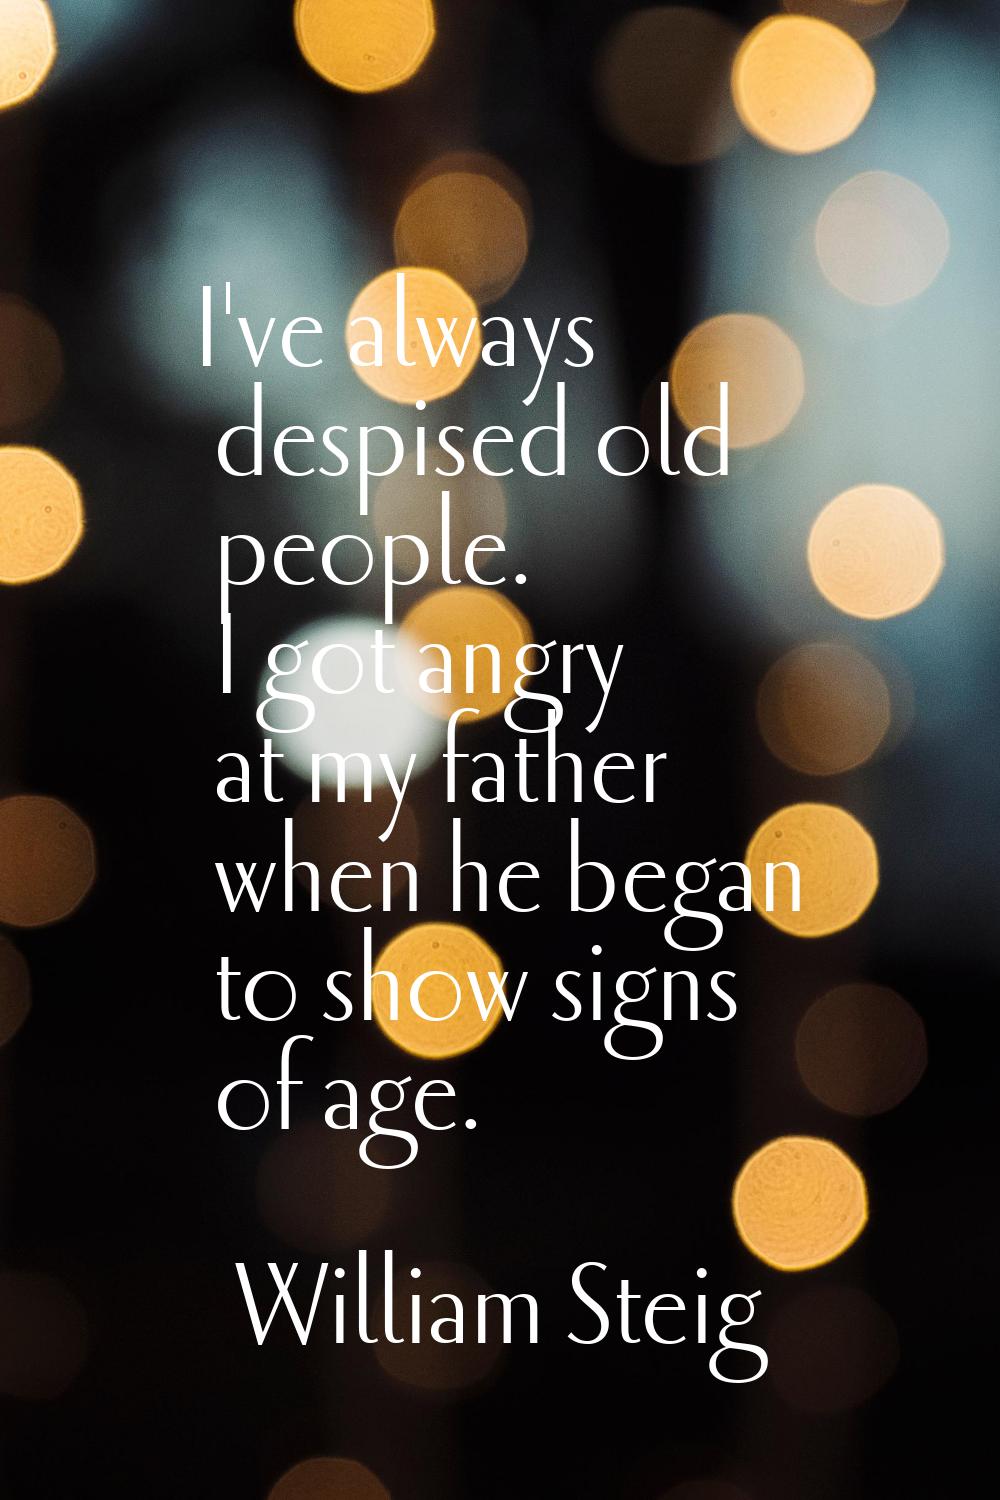 I've always despised old people. I got angry at my father when he began to show signs of age.